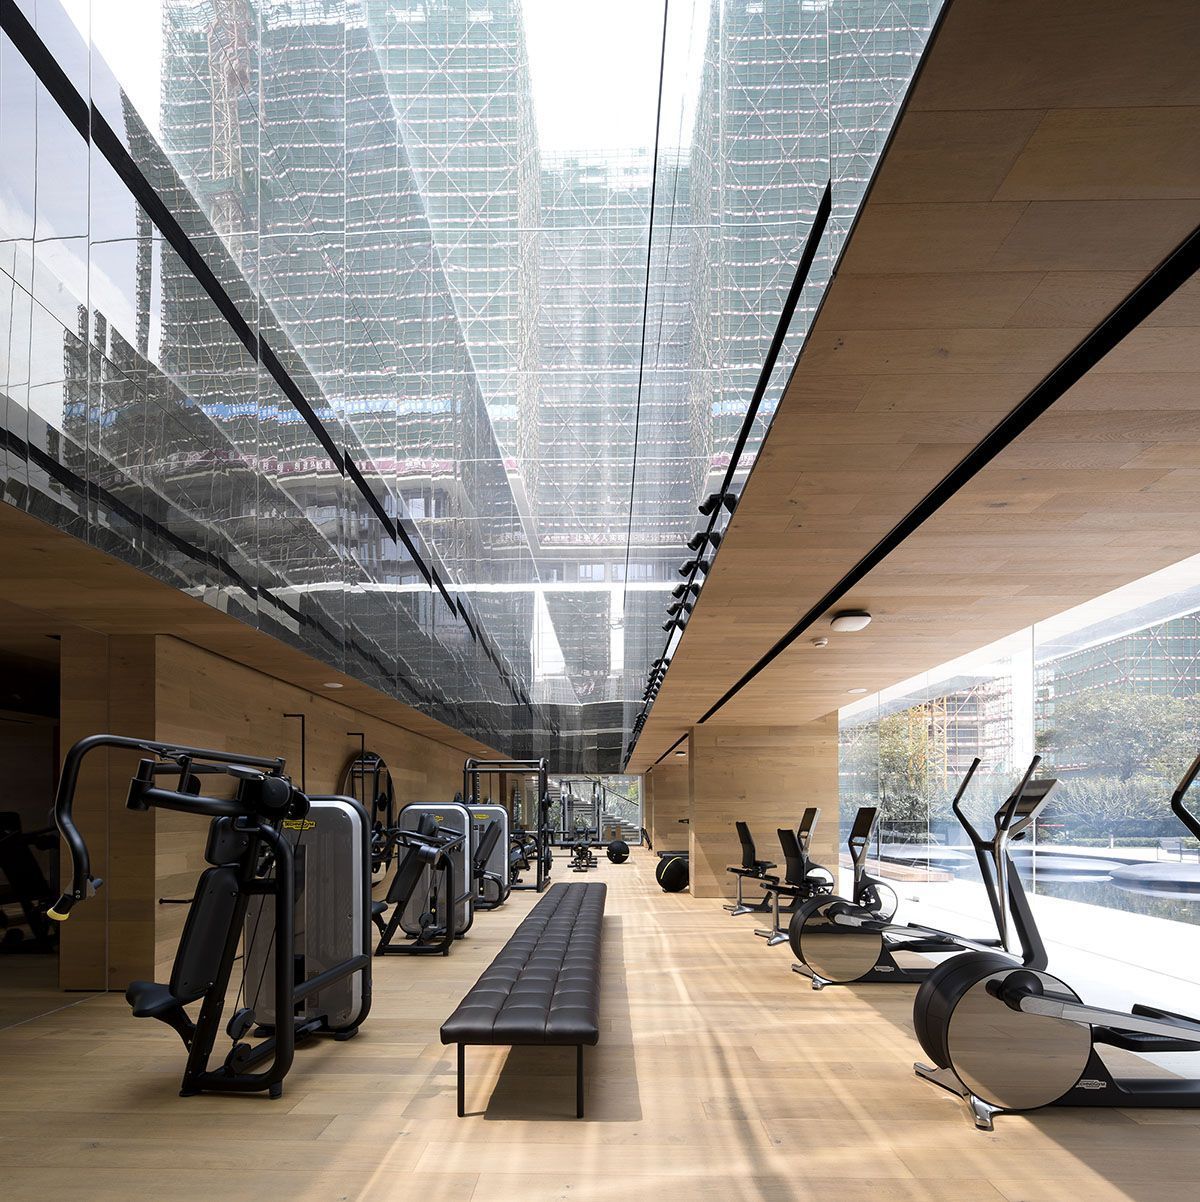 This is the swankiest gym we've ever seen - This is the swankiest gym we've ever seen -   11 luxury fitness Interior ideas